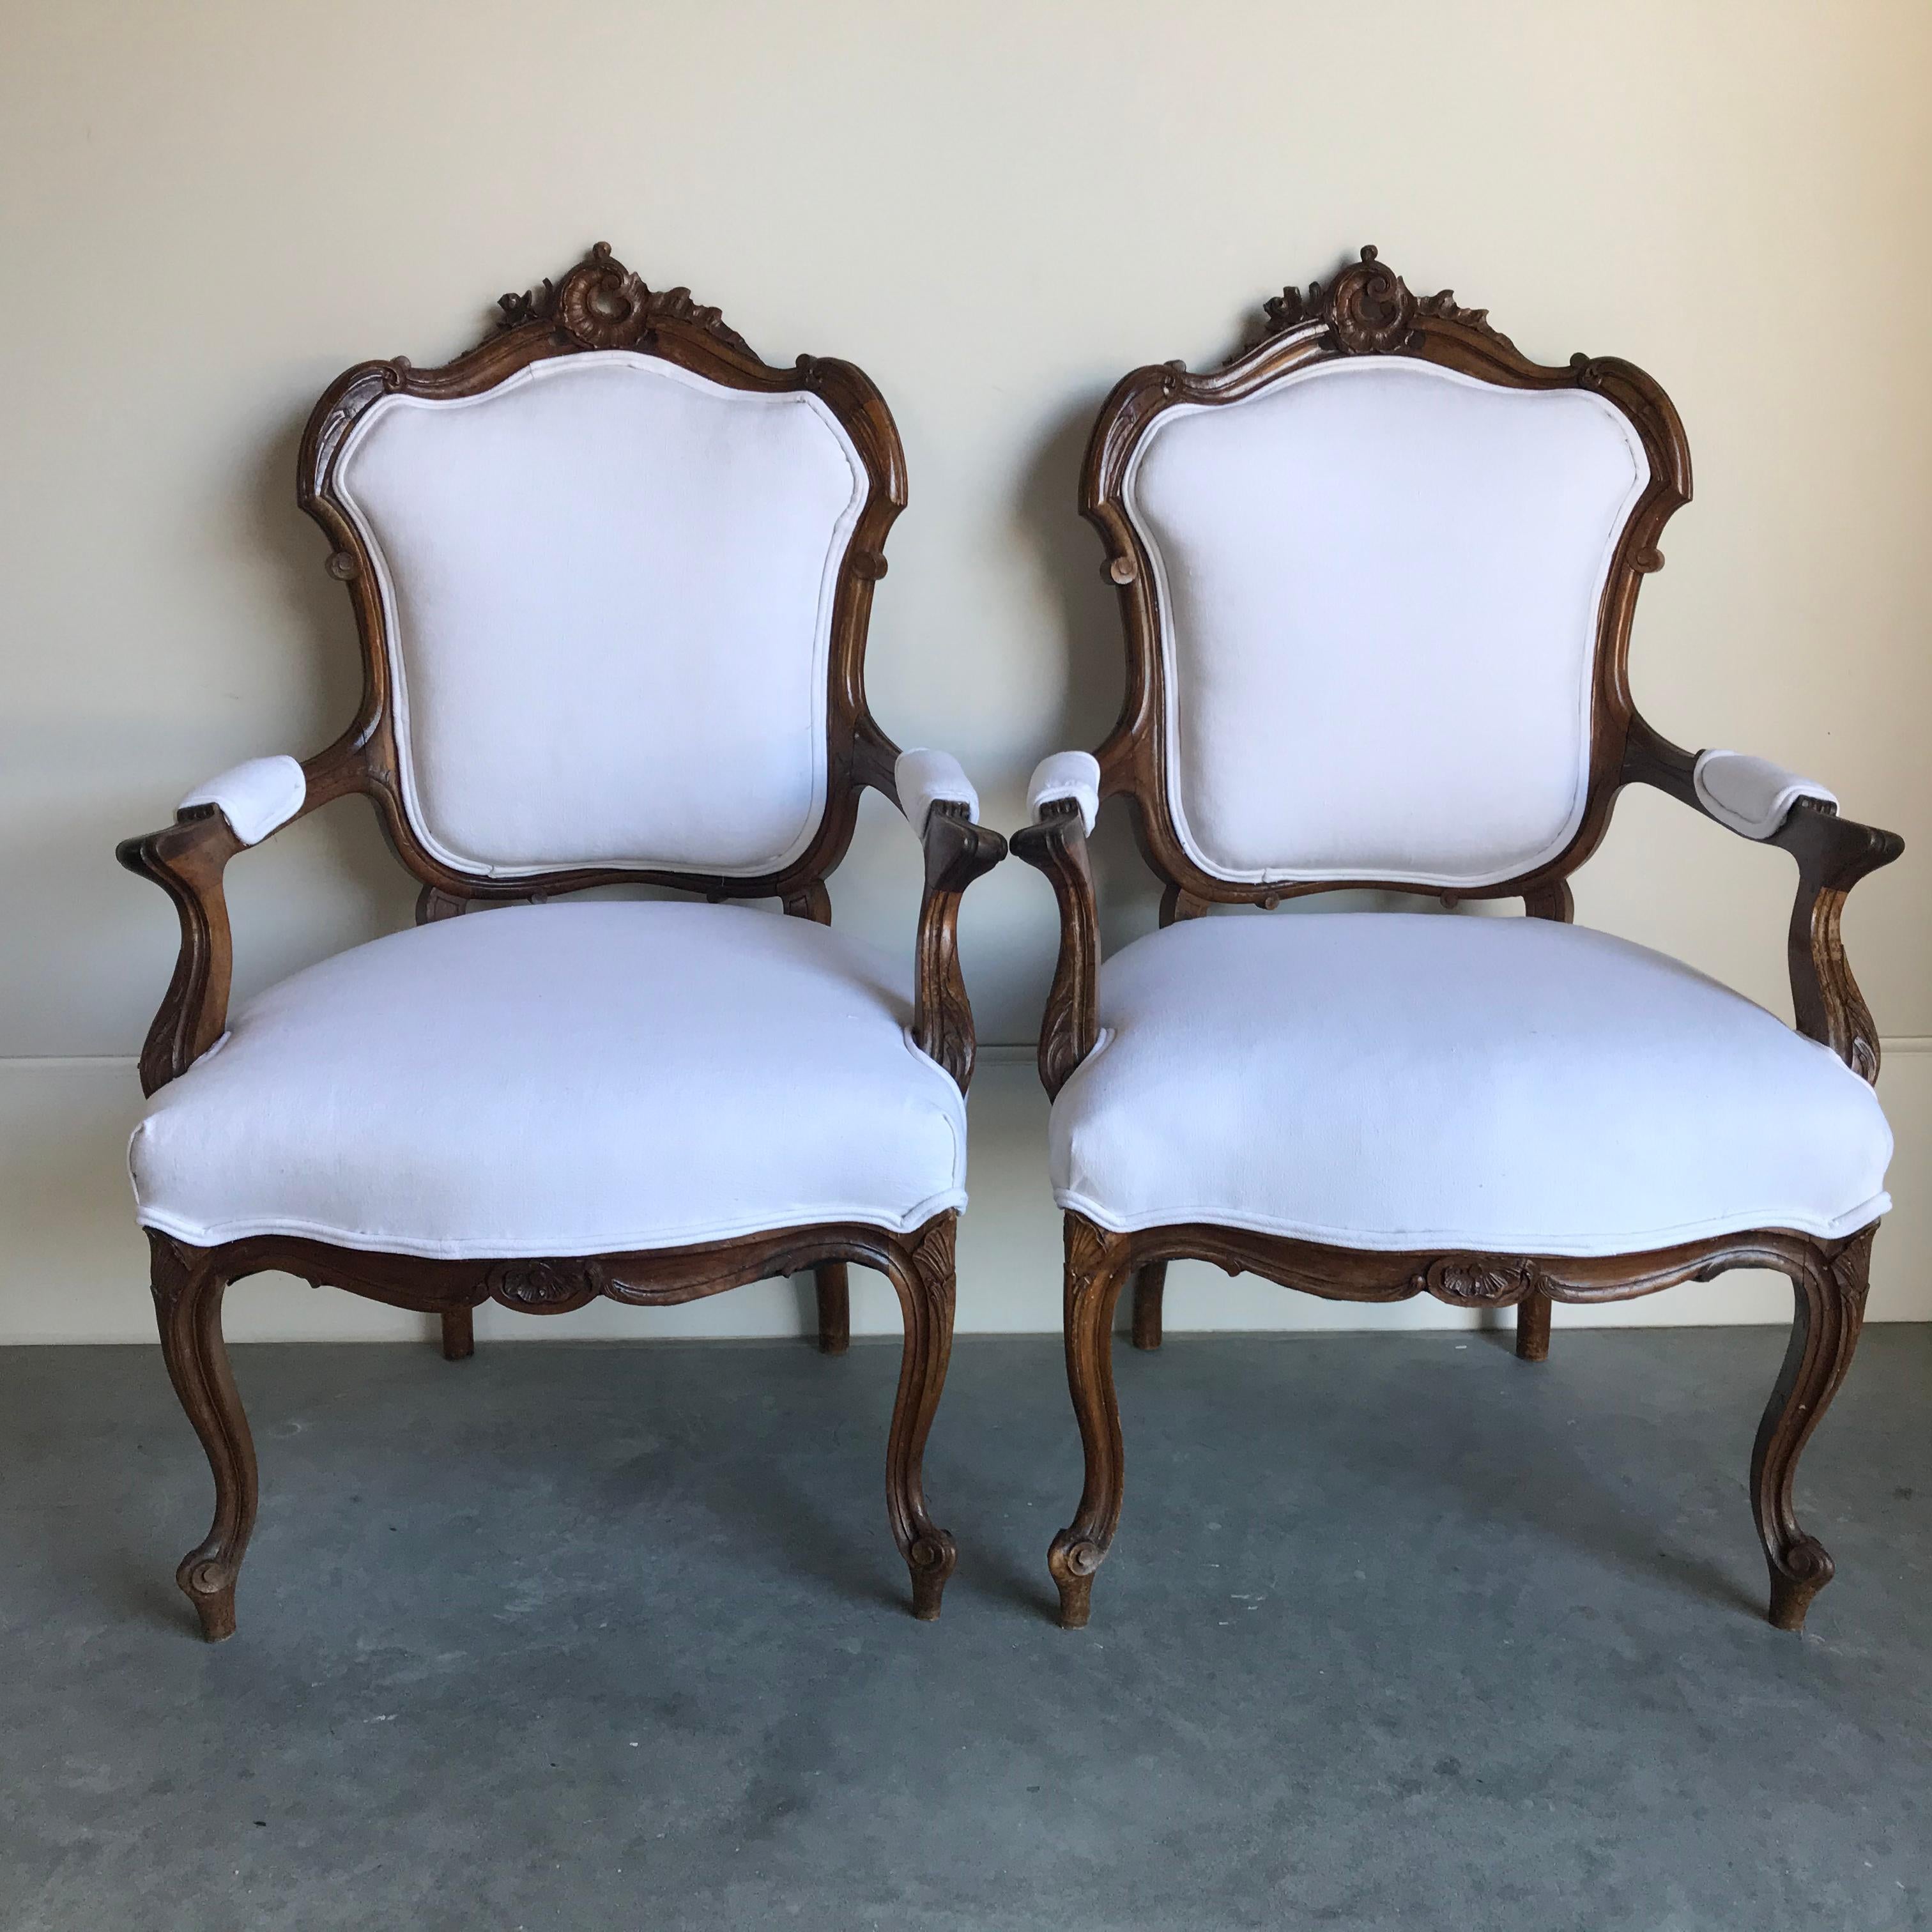 Two elegant Louis XV intricately carved walnut fauteuils or armchairs on cabriole legs decorated with hand carved seashell patterns. The arched back of the chair features delicately carved seashells and scrolls, and the wood armchairs are newly